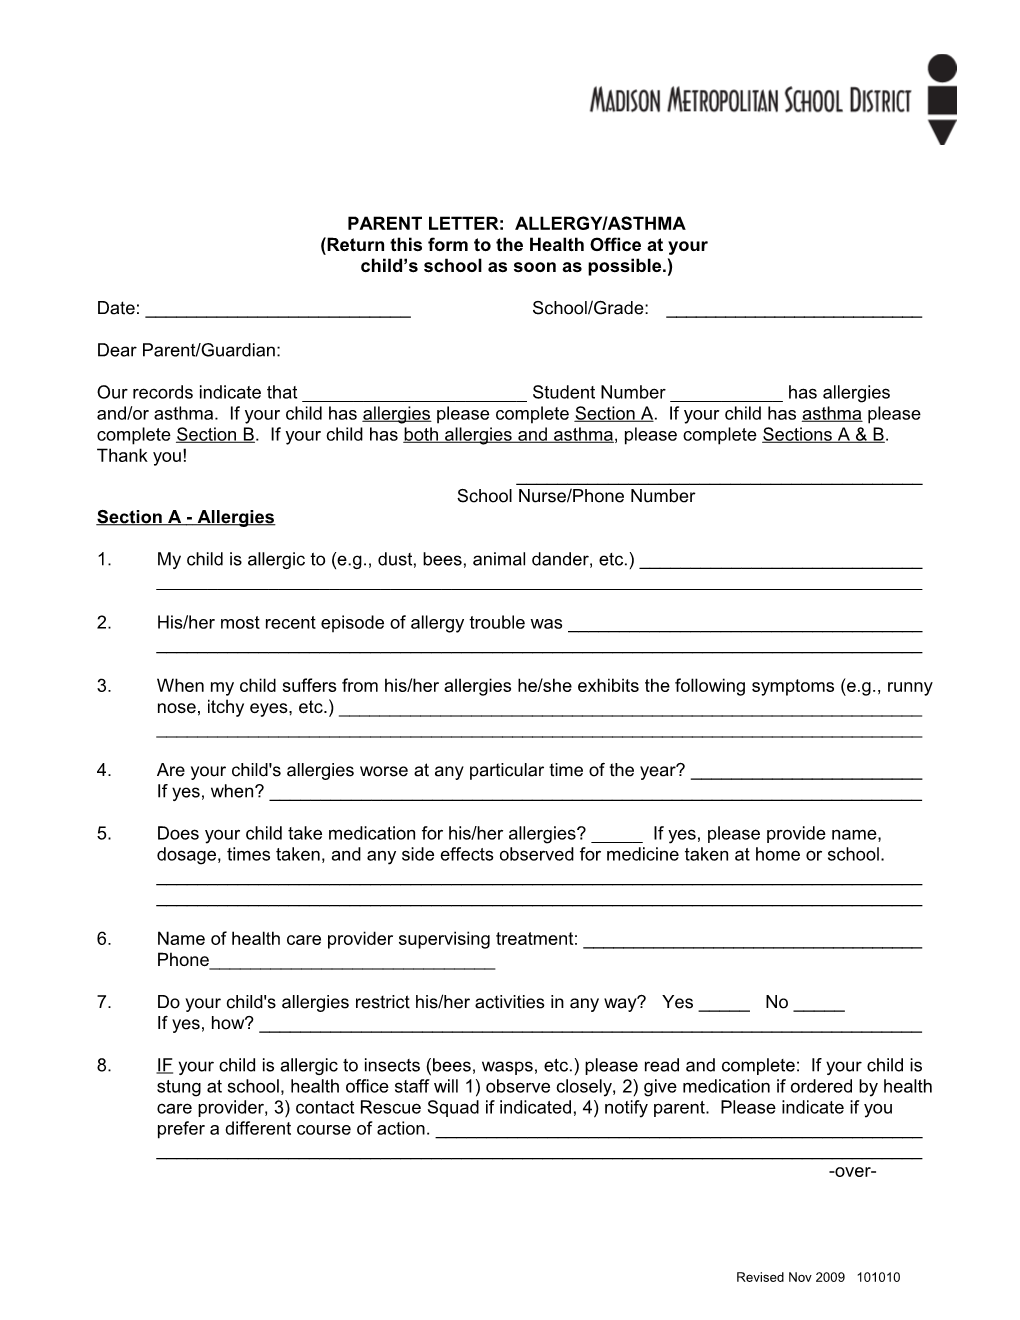 (Return This Form to the Health Office at Your